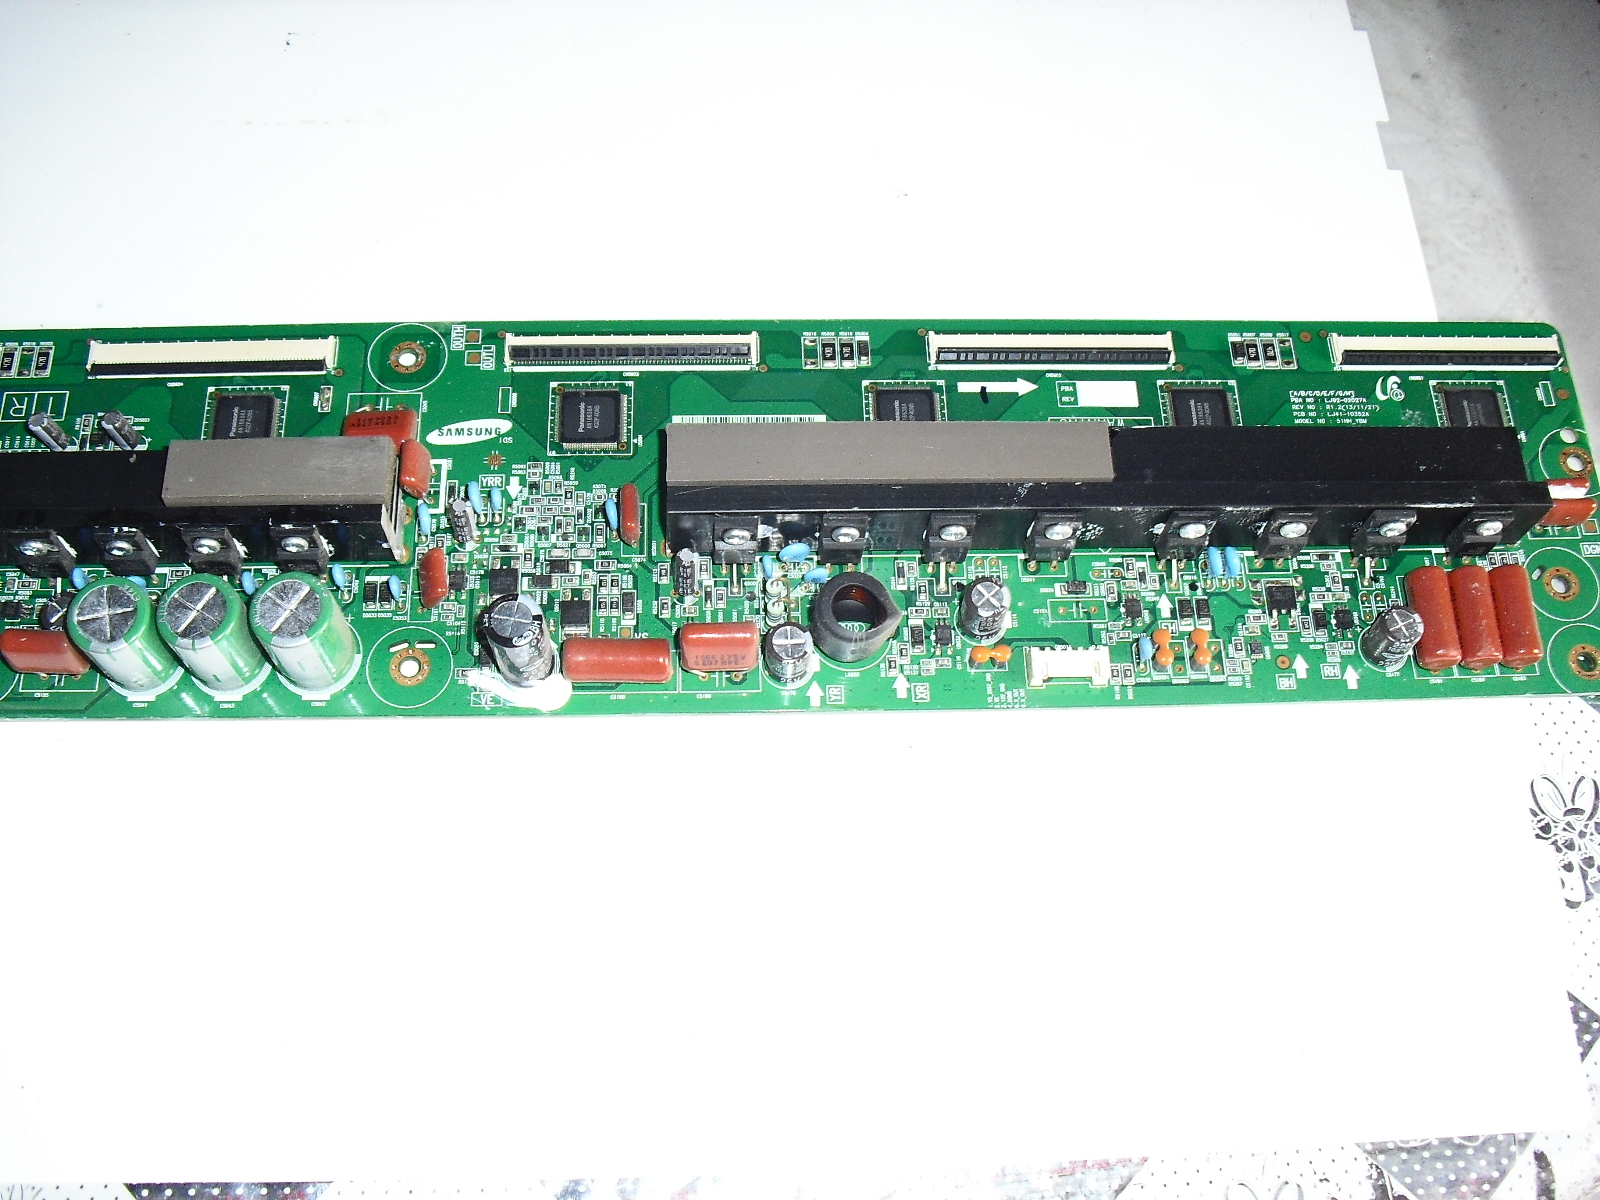 Primary image for lj41-10352a,   lj92-02027a   y  main  board  for  samsung  pn51f4500